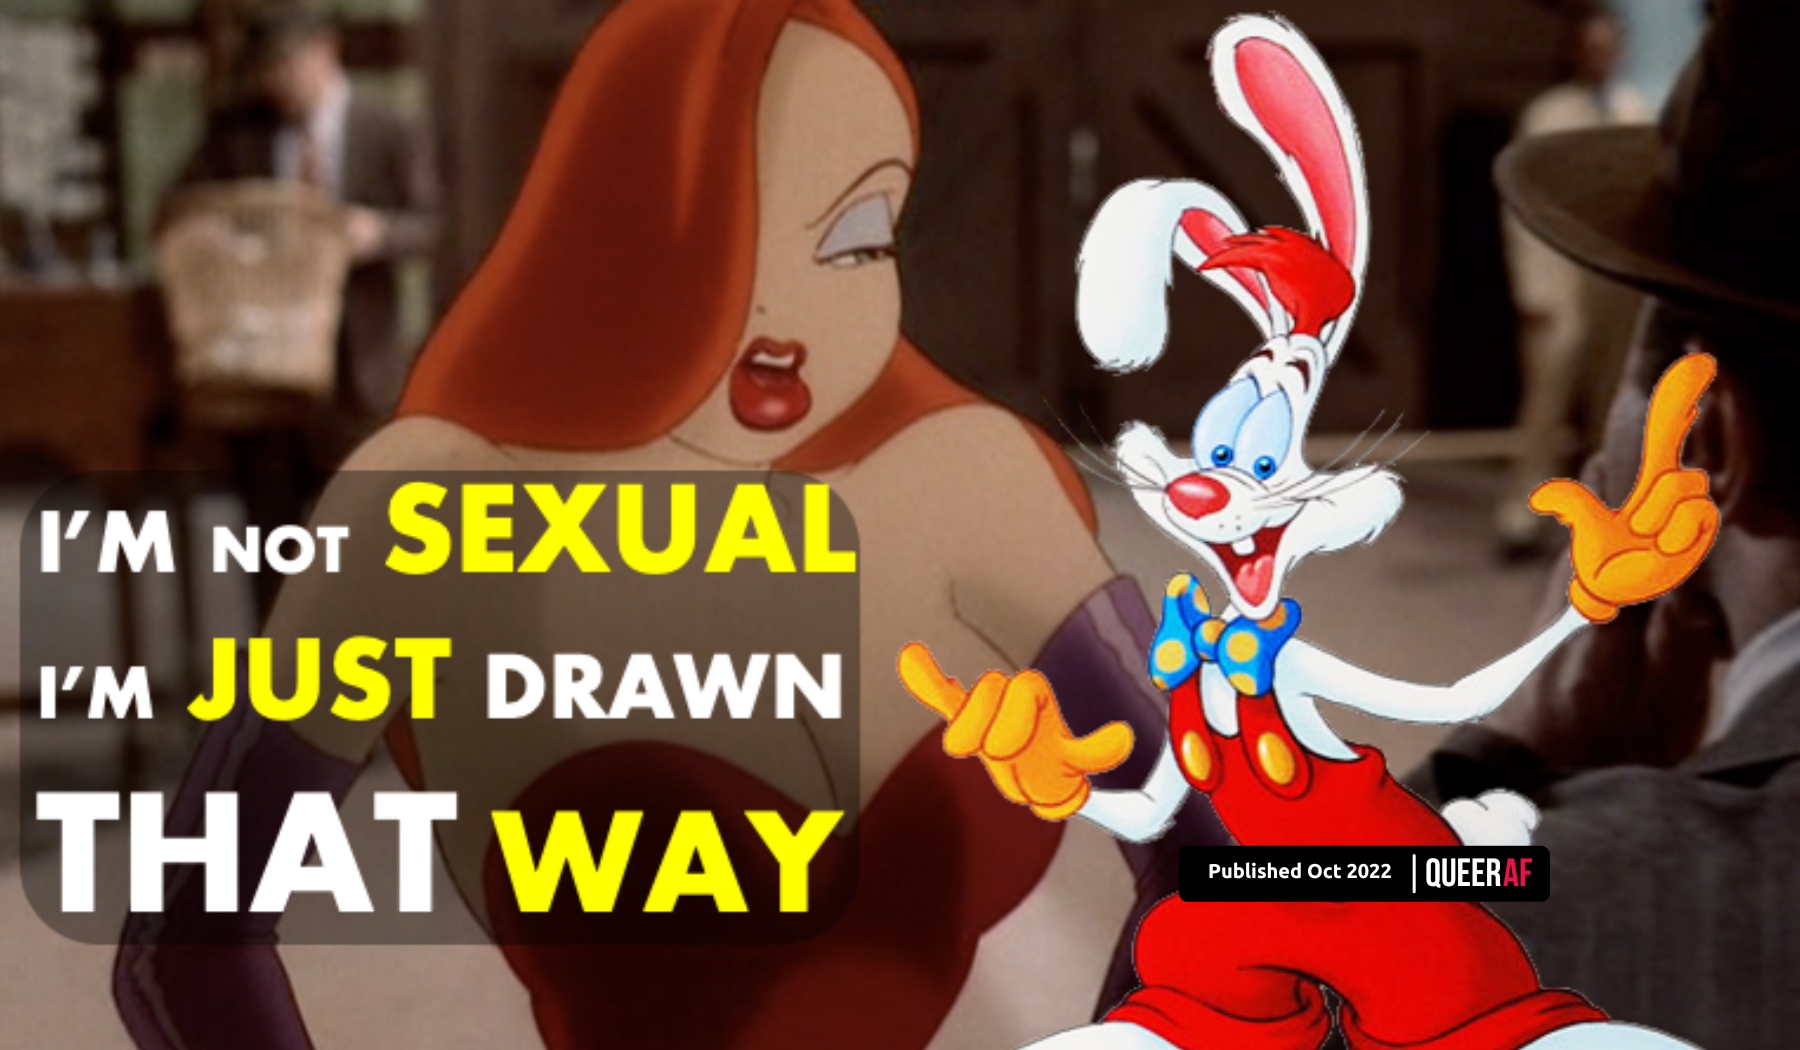 Jessica Rabbit is an asexual icon image